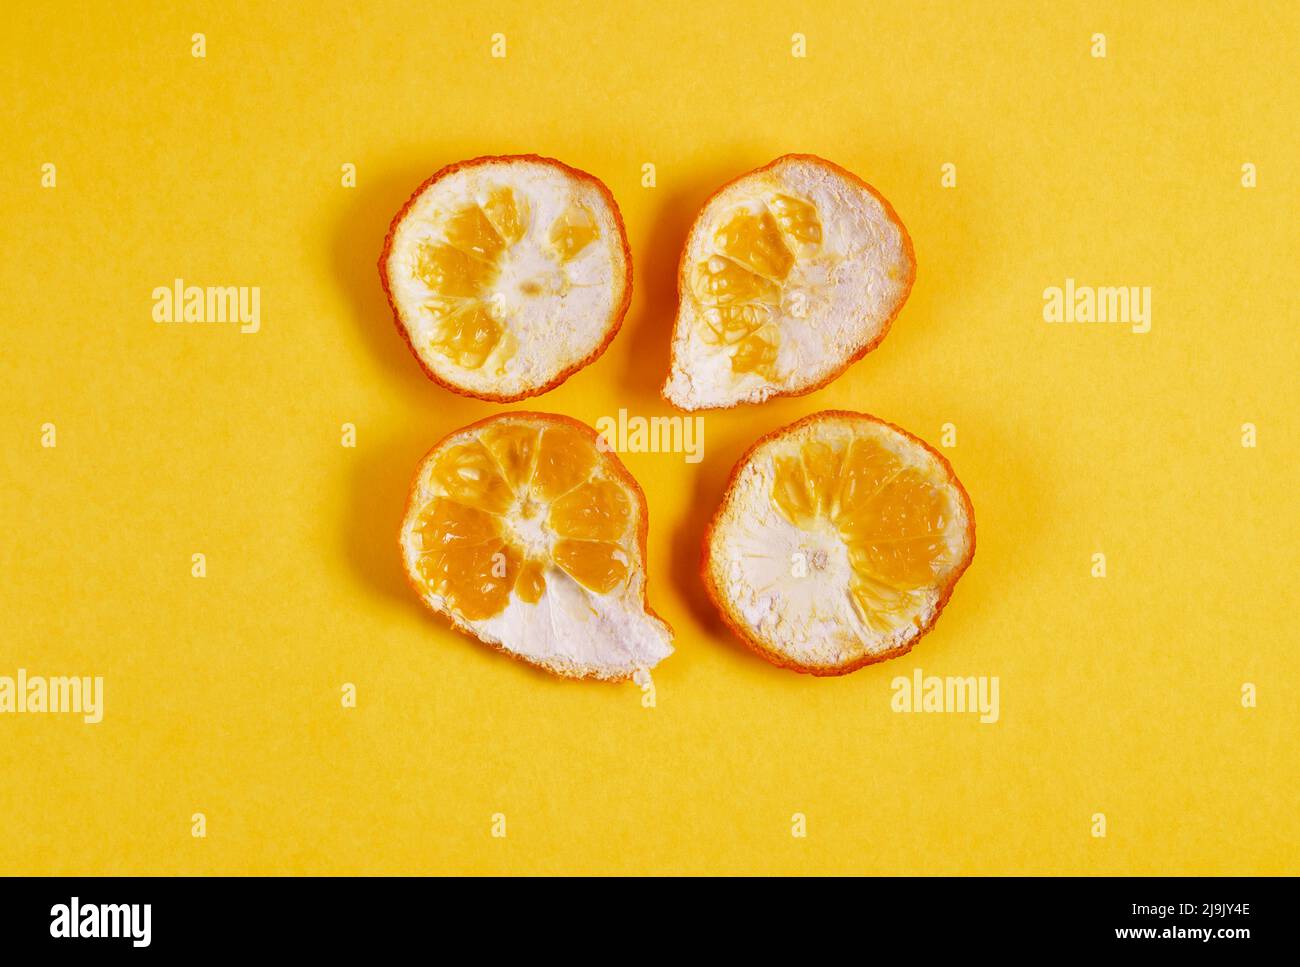 Several pieces of orange pell on yellow background Stock Photo